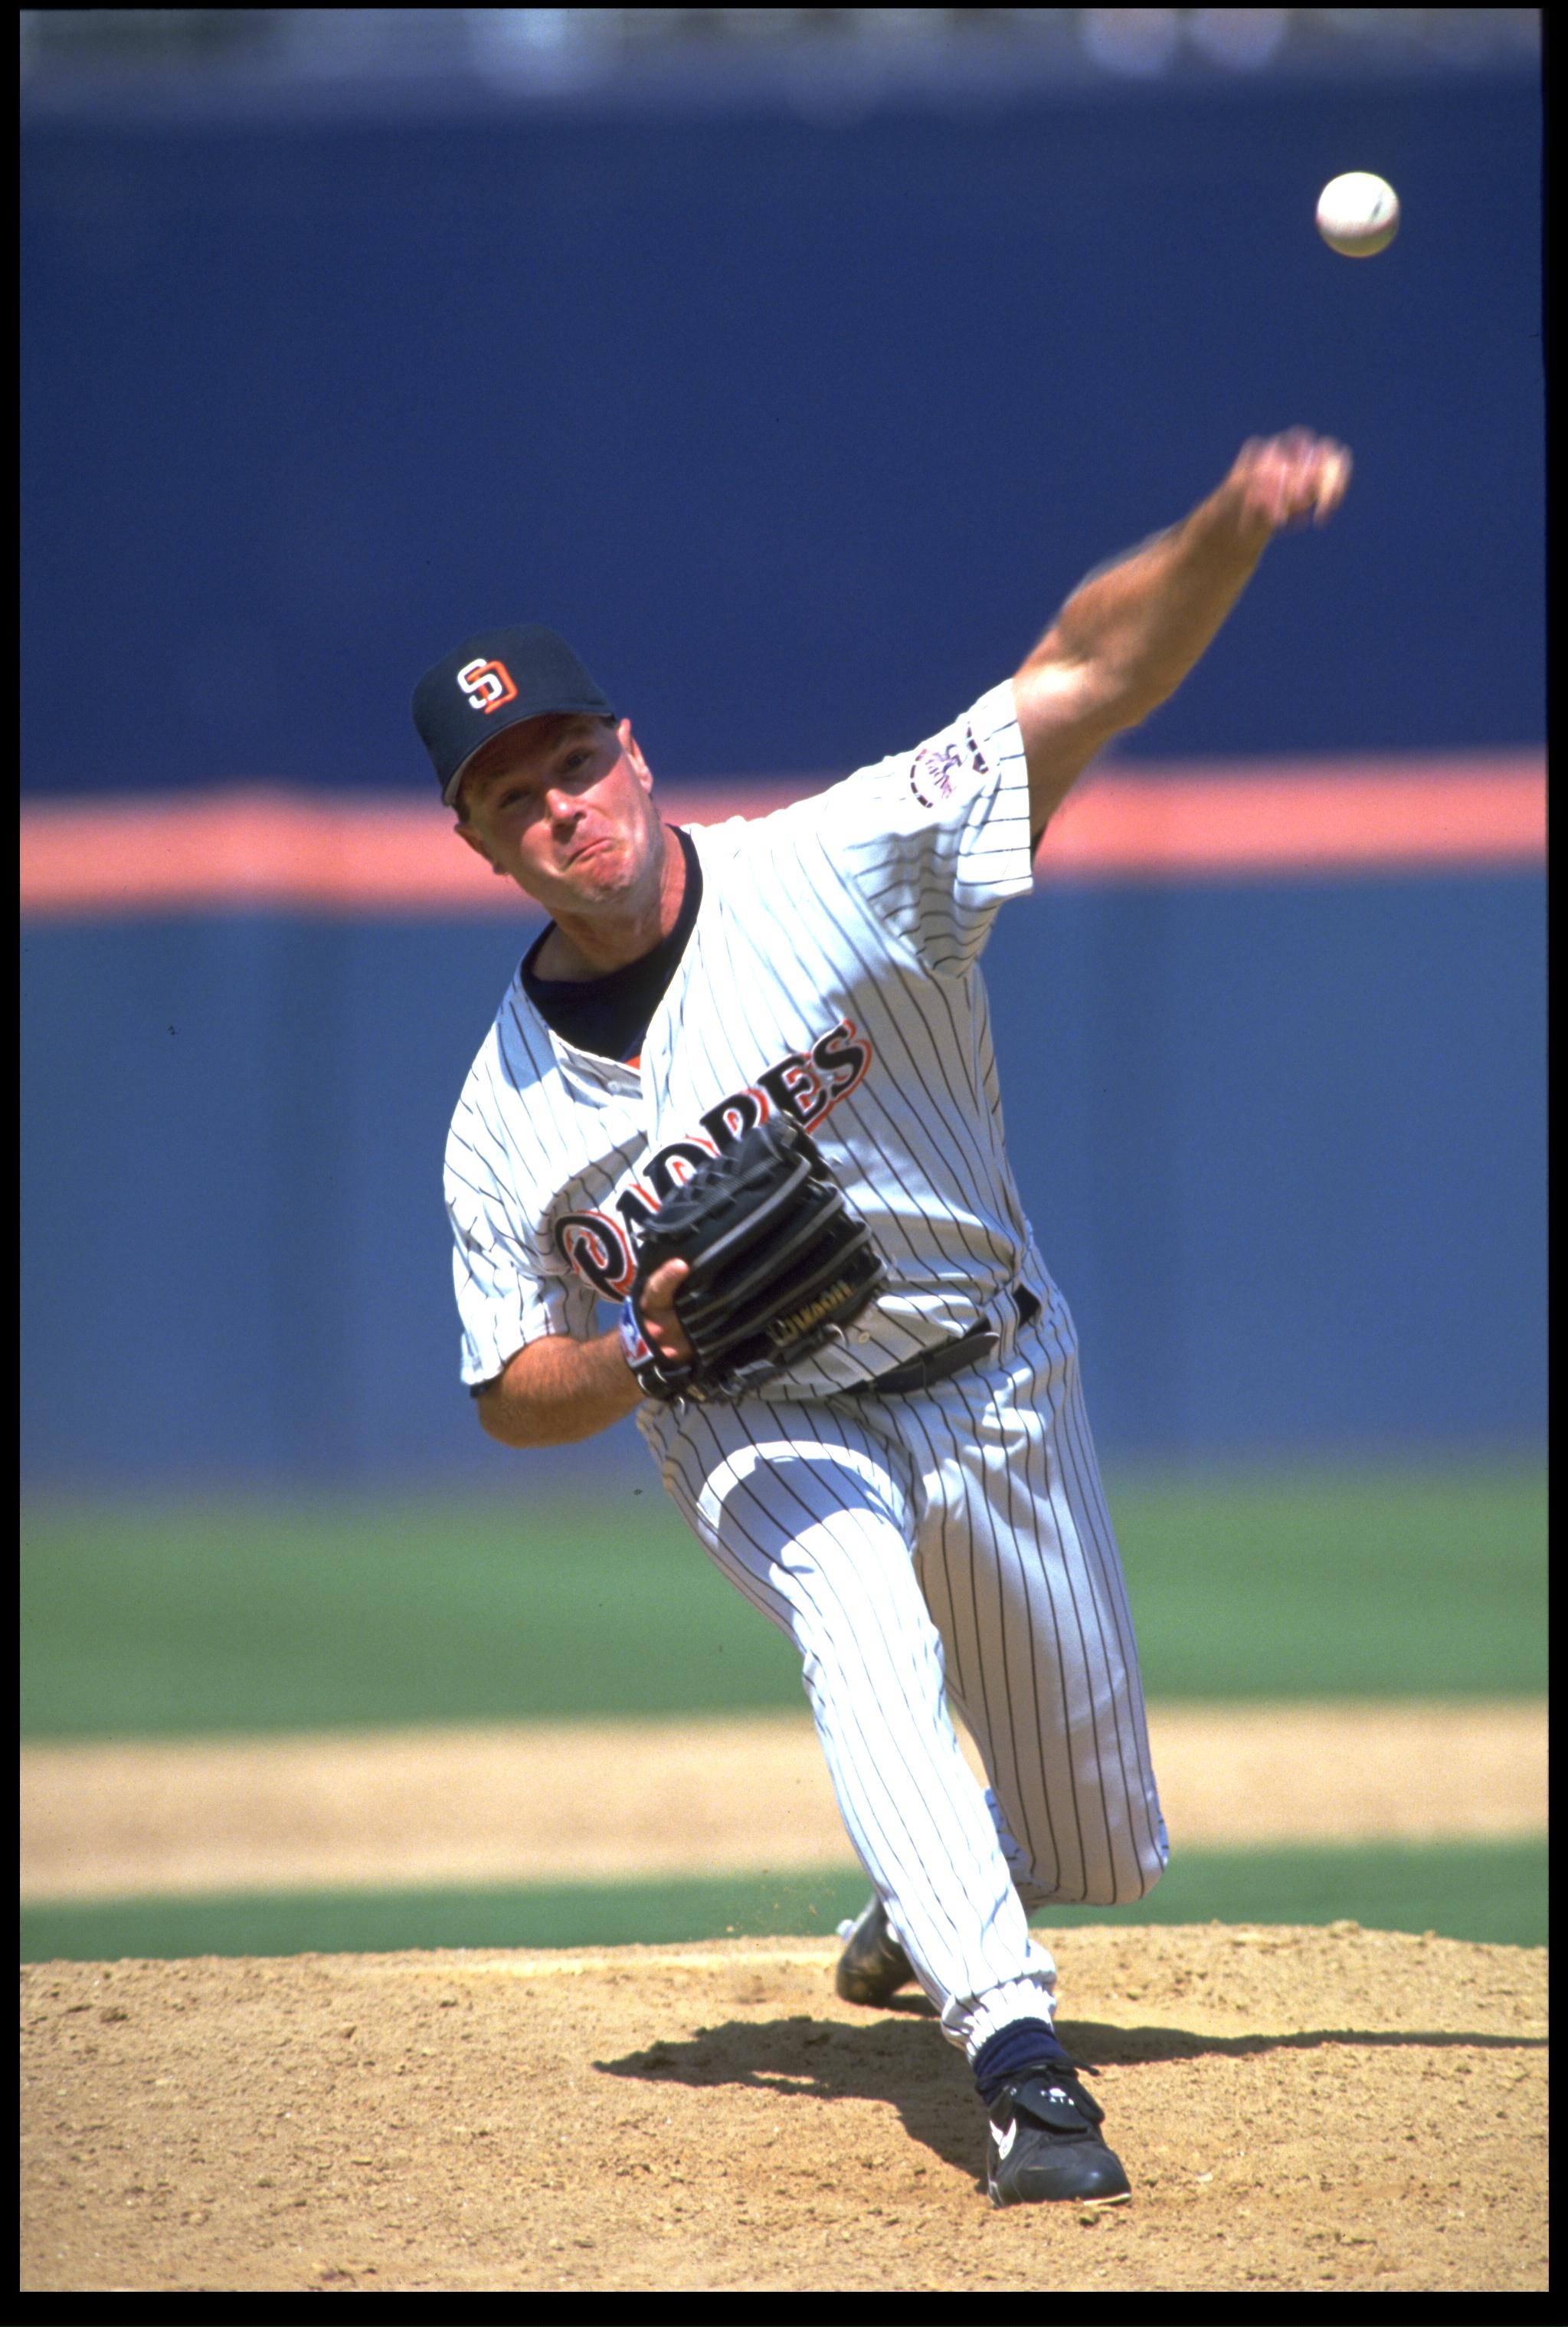 15 Jul 1993: MARK DAVIS, RELIEVER FOR THE SAN DIEGO PADRES, THROWS A PITCH AGAINST THE PHILADELPHIA PHILLIES DURING THE PADRES'' 4-2 WIN AT JACK MURPHY STADIUM IN SAN DIEGO, CALIFORNIA.